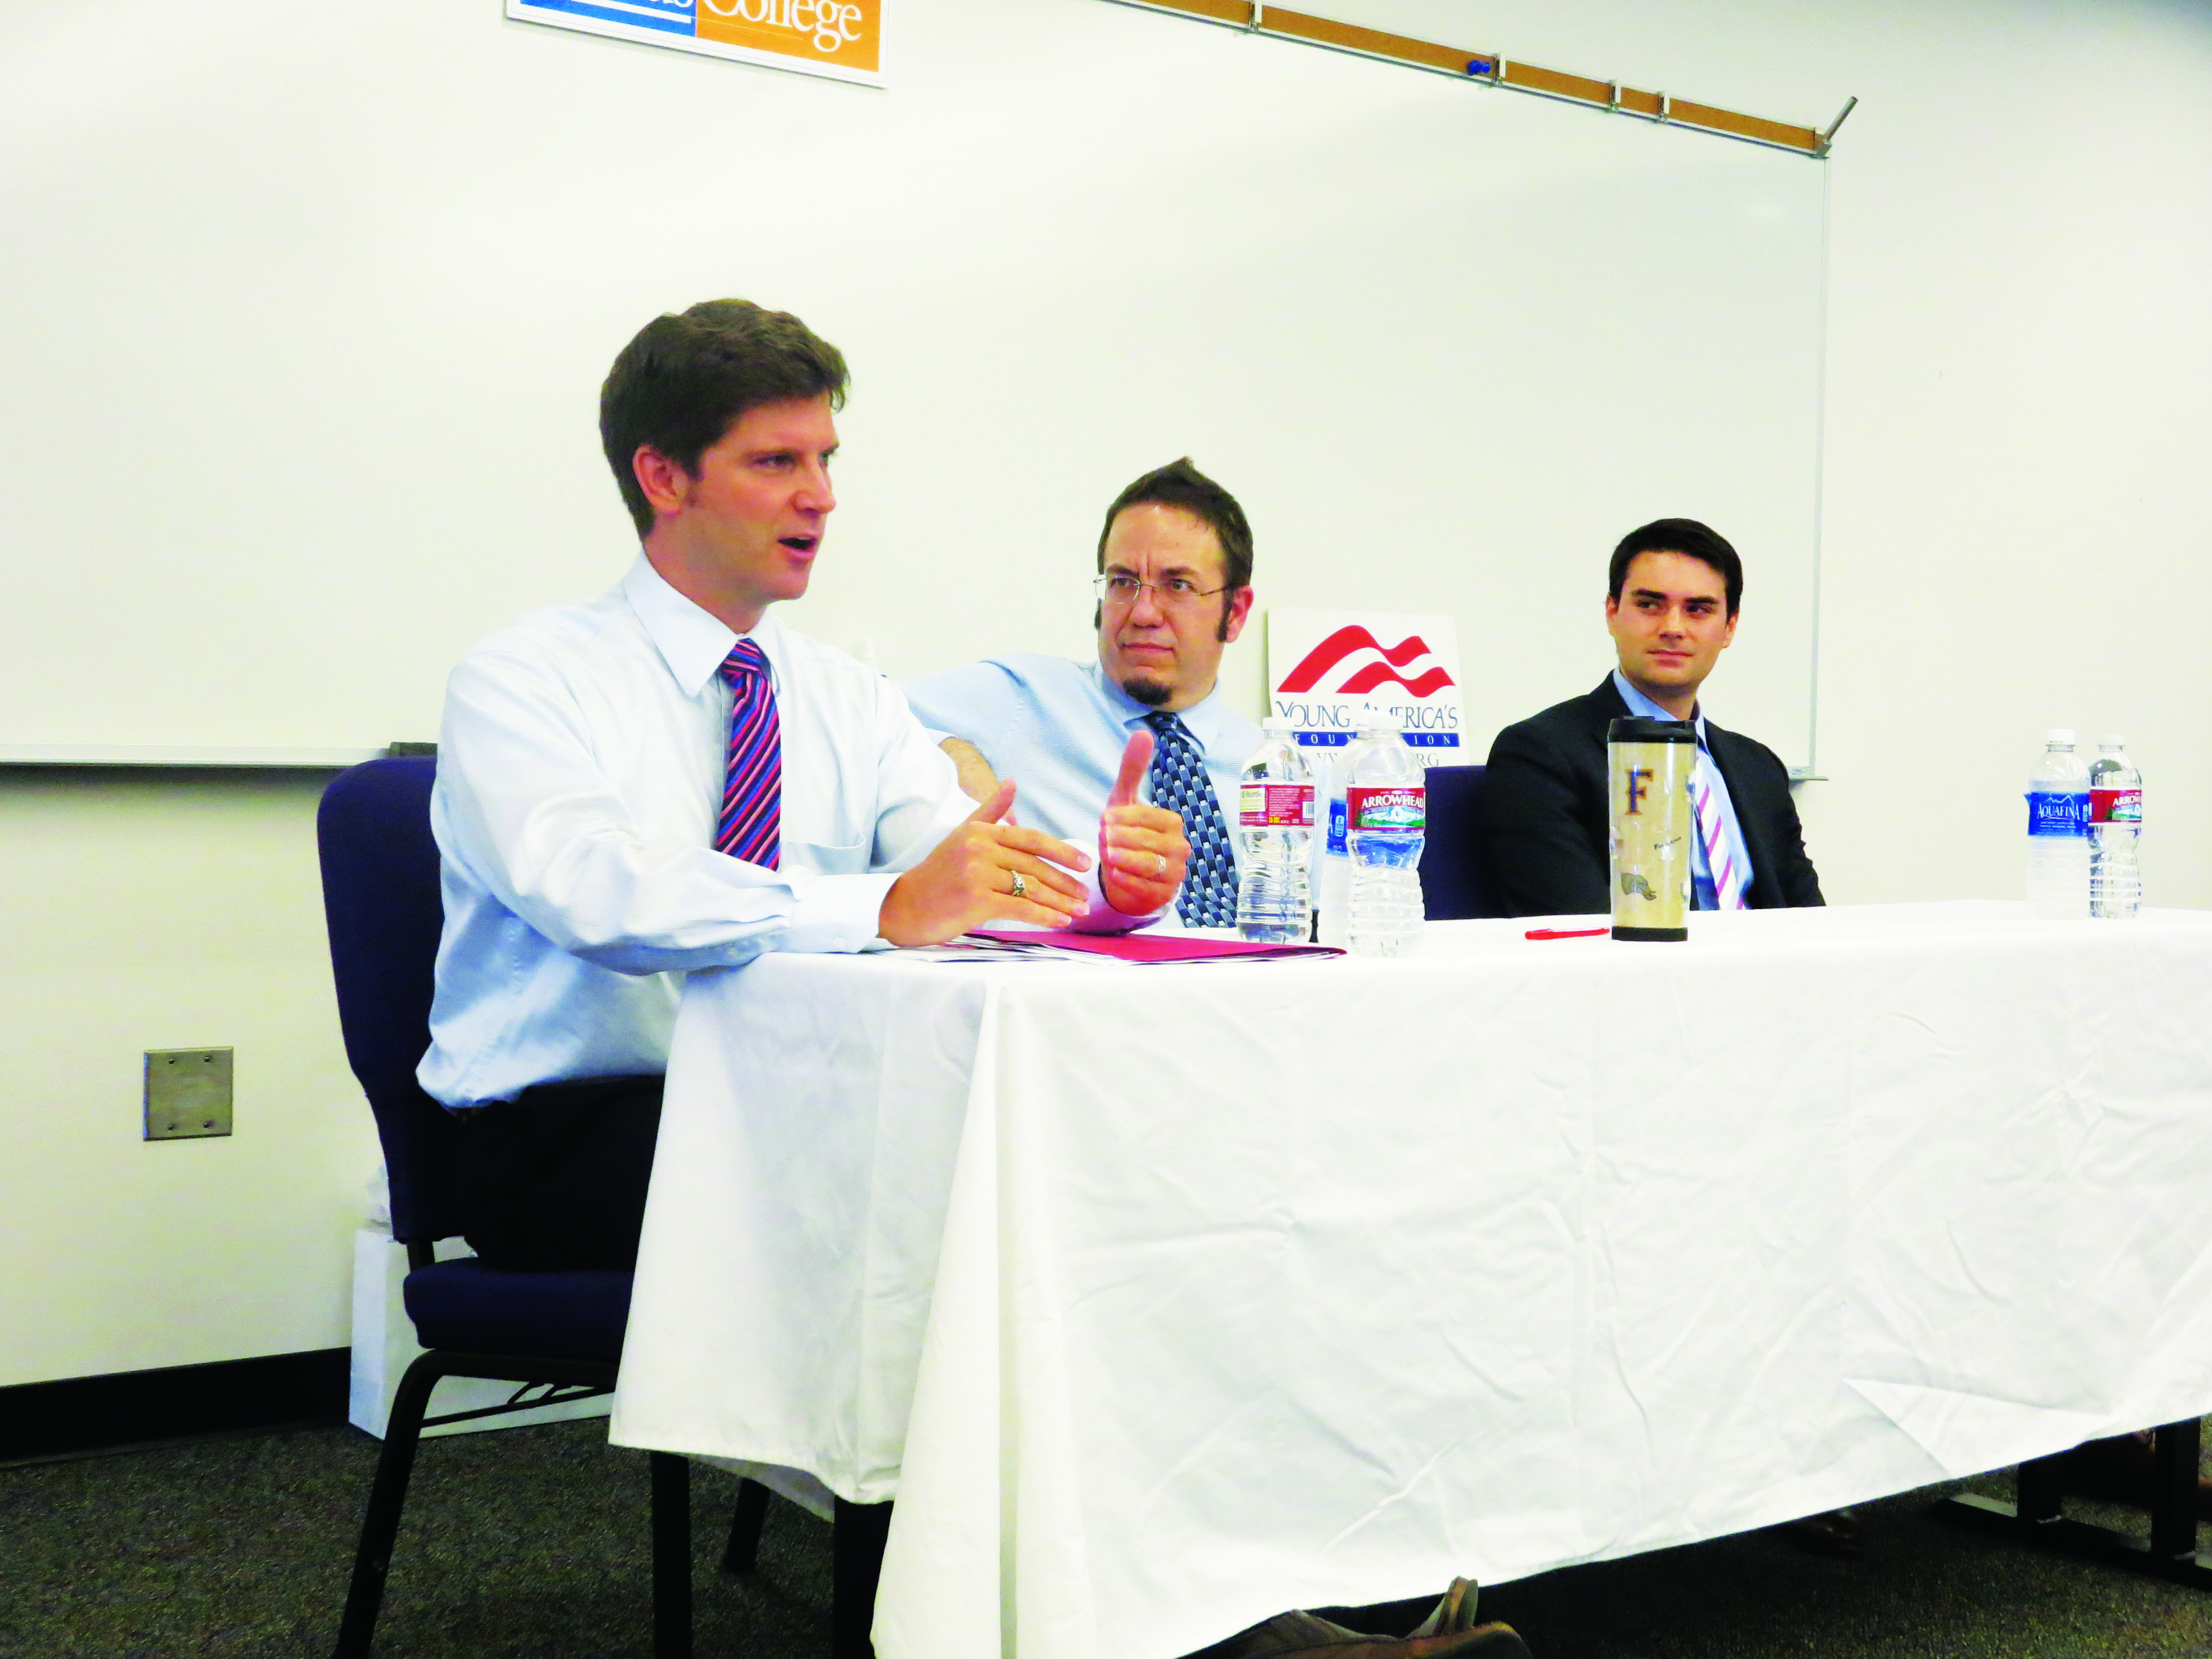 Debate focuses on privacy issues vs national security